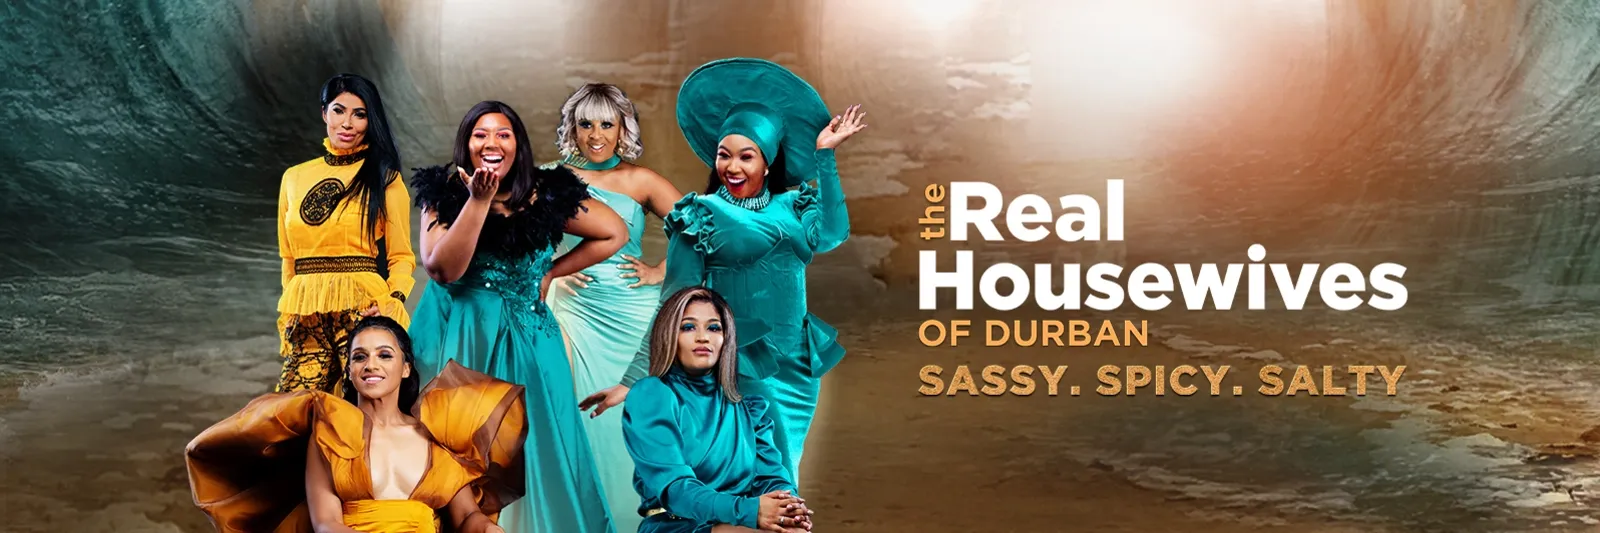 The Real Housewives Of Durban S04 (Episode 10 - 12 Added) 19